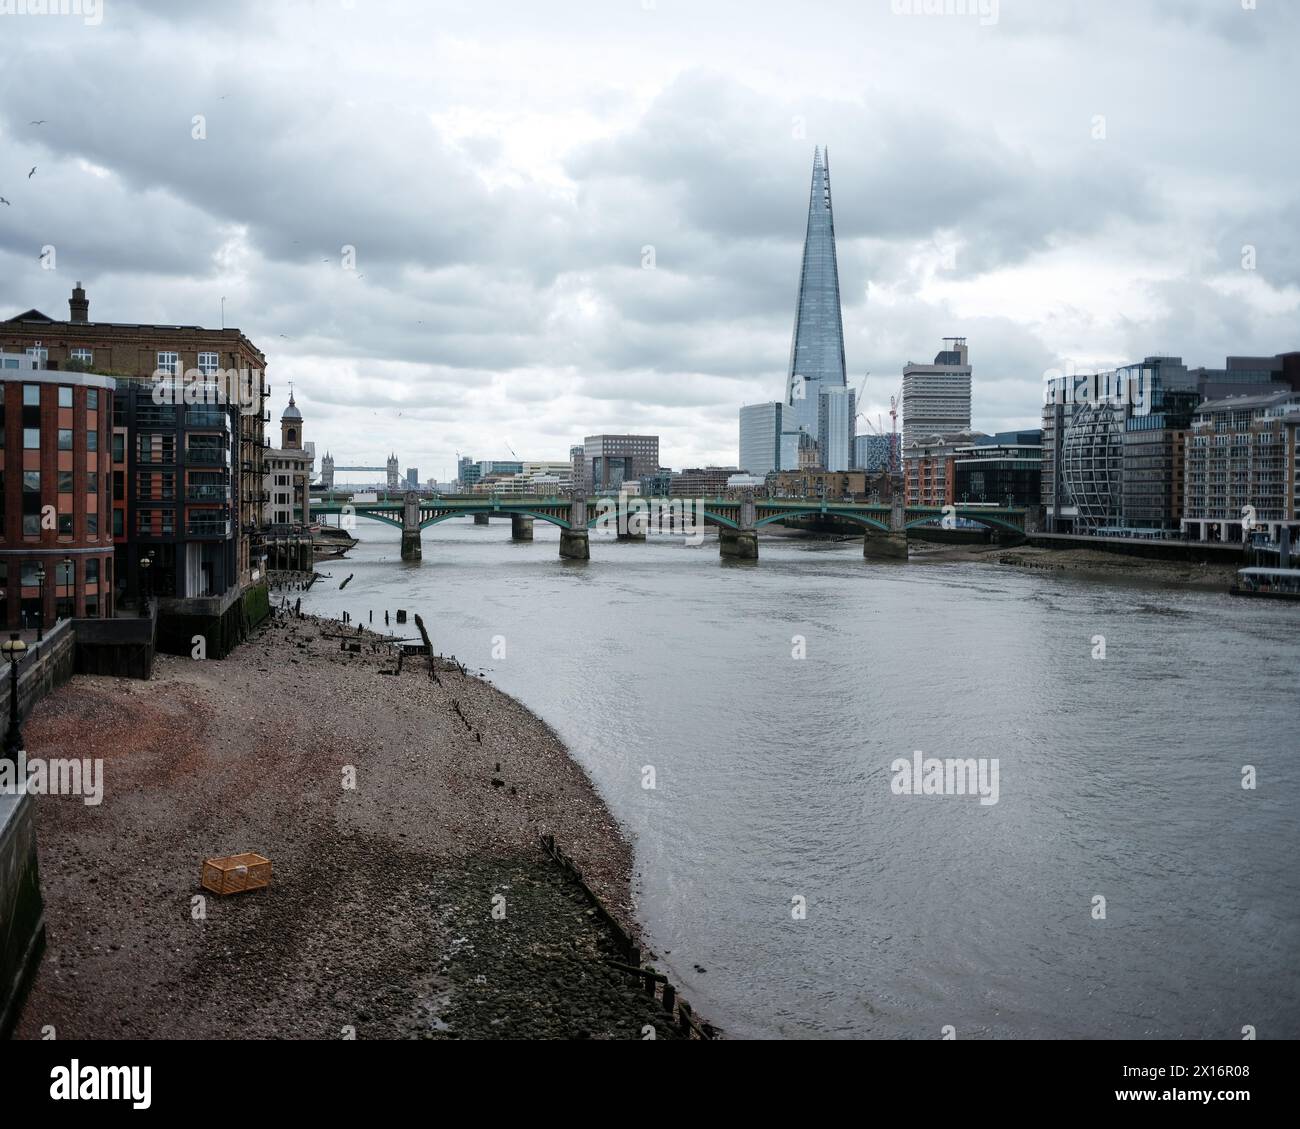 The Shard, also referred to as the Shard London Bridge and formerly London Bridge Tower, is a pyramid-shaped 72-storey mixed-use development Stock Photo